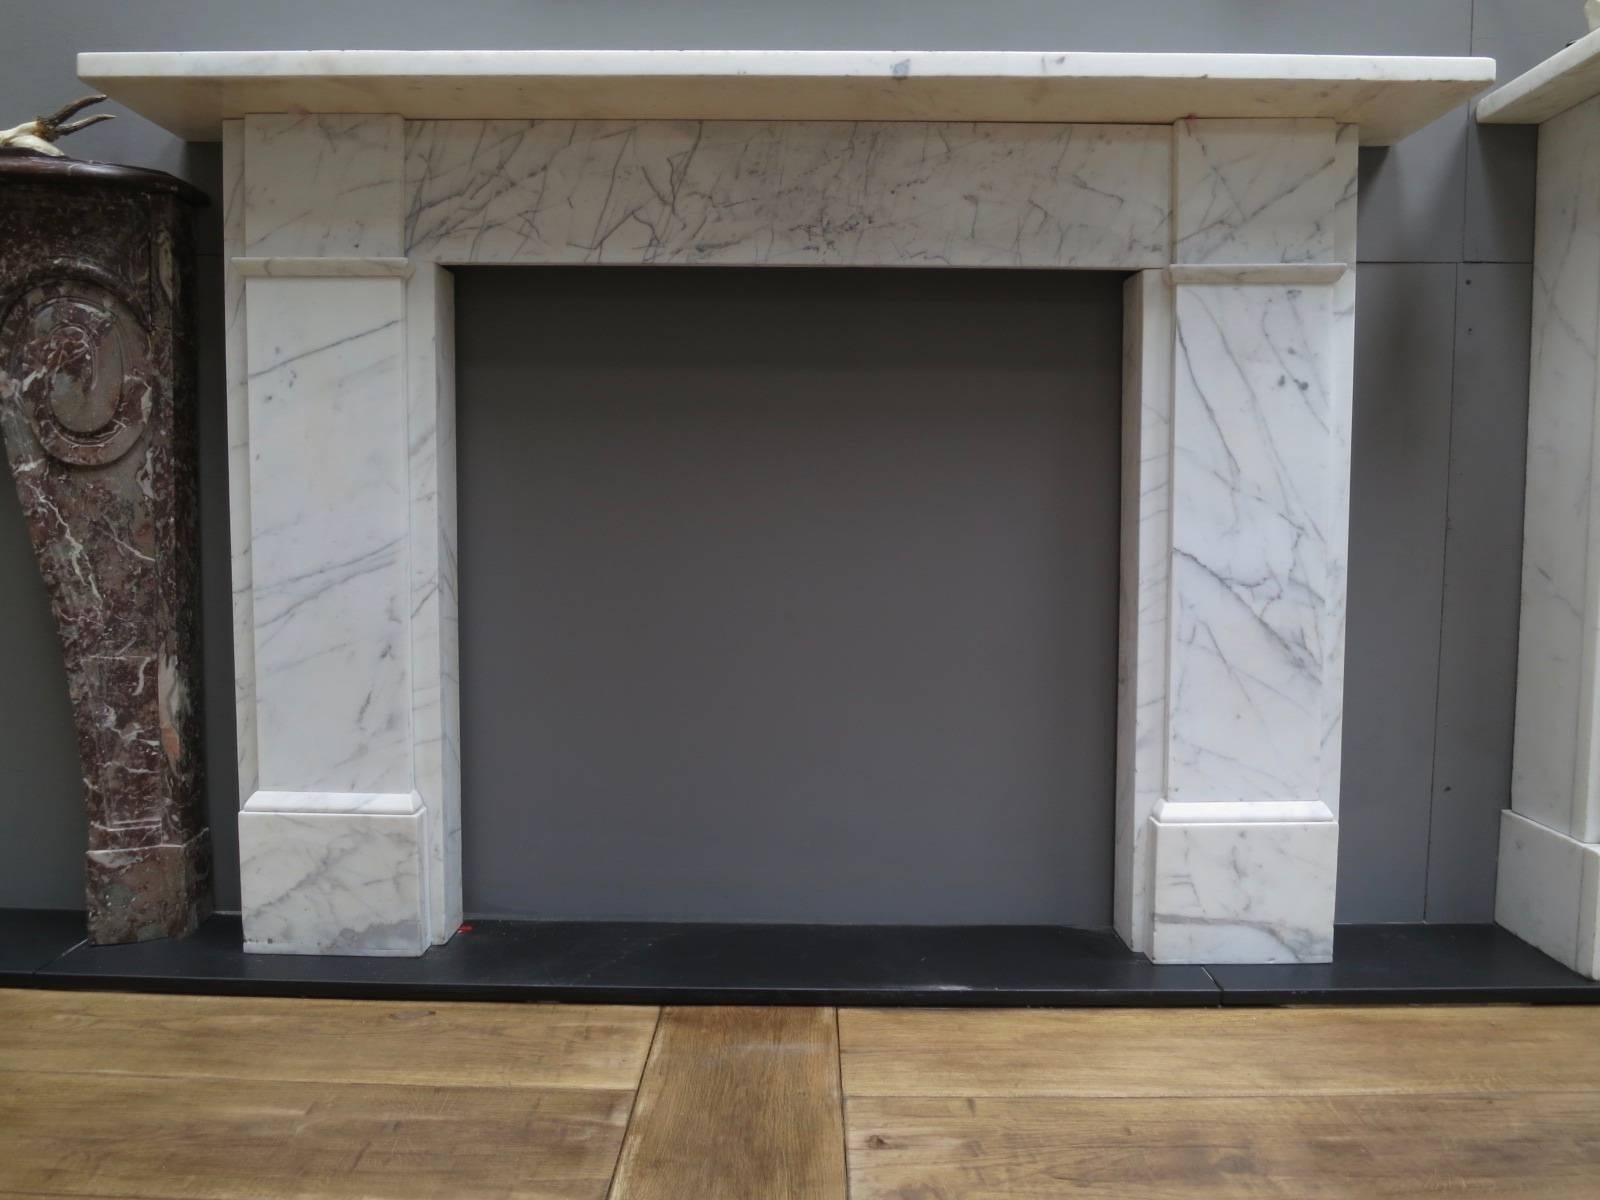 A large pair of fireplaces from the mid-19th century in veined white marble, simply designed and typical of that period, however in very high quality marble. One as usual slightly smaller than the other.

Opening sizes 
94cm H x 95.5cm W
